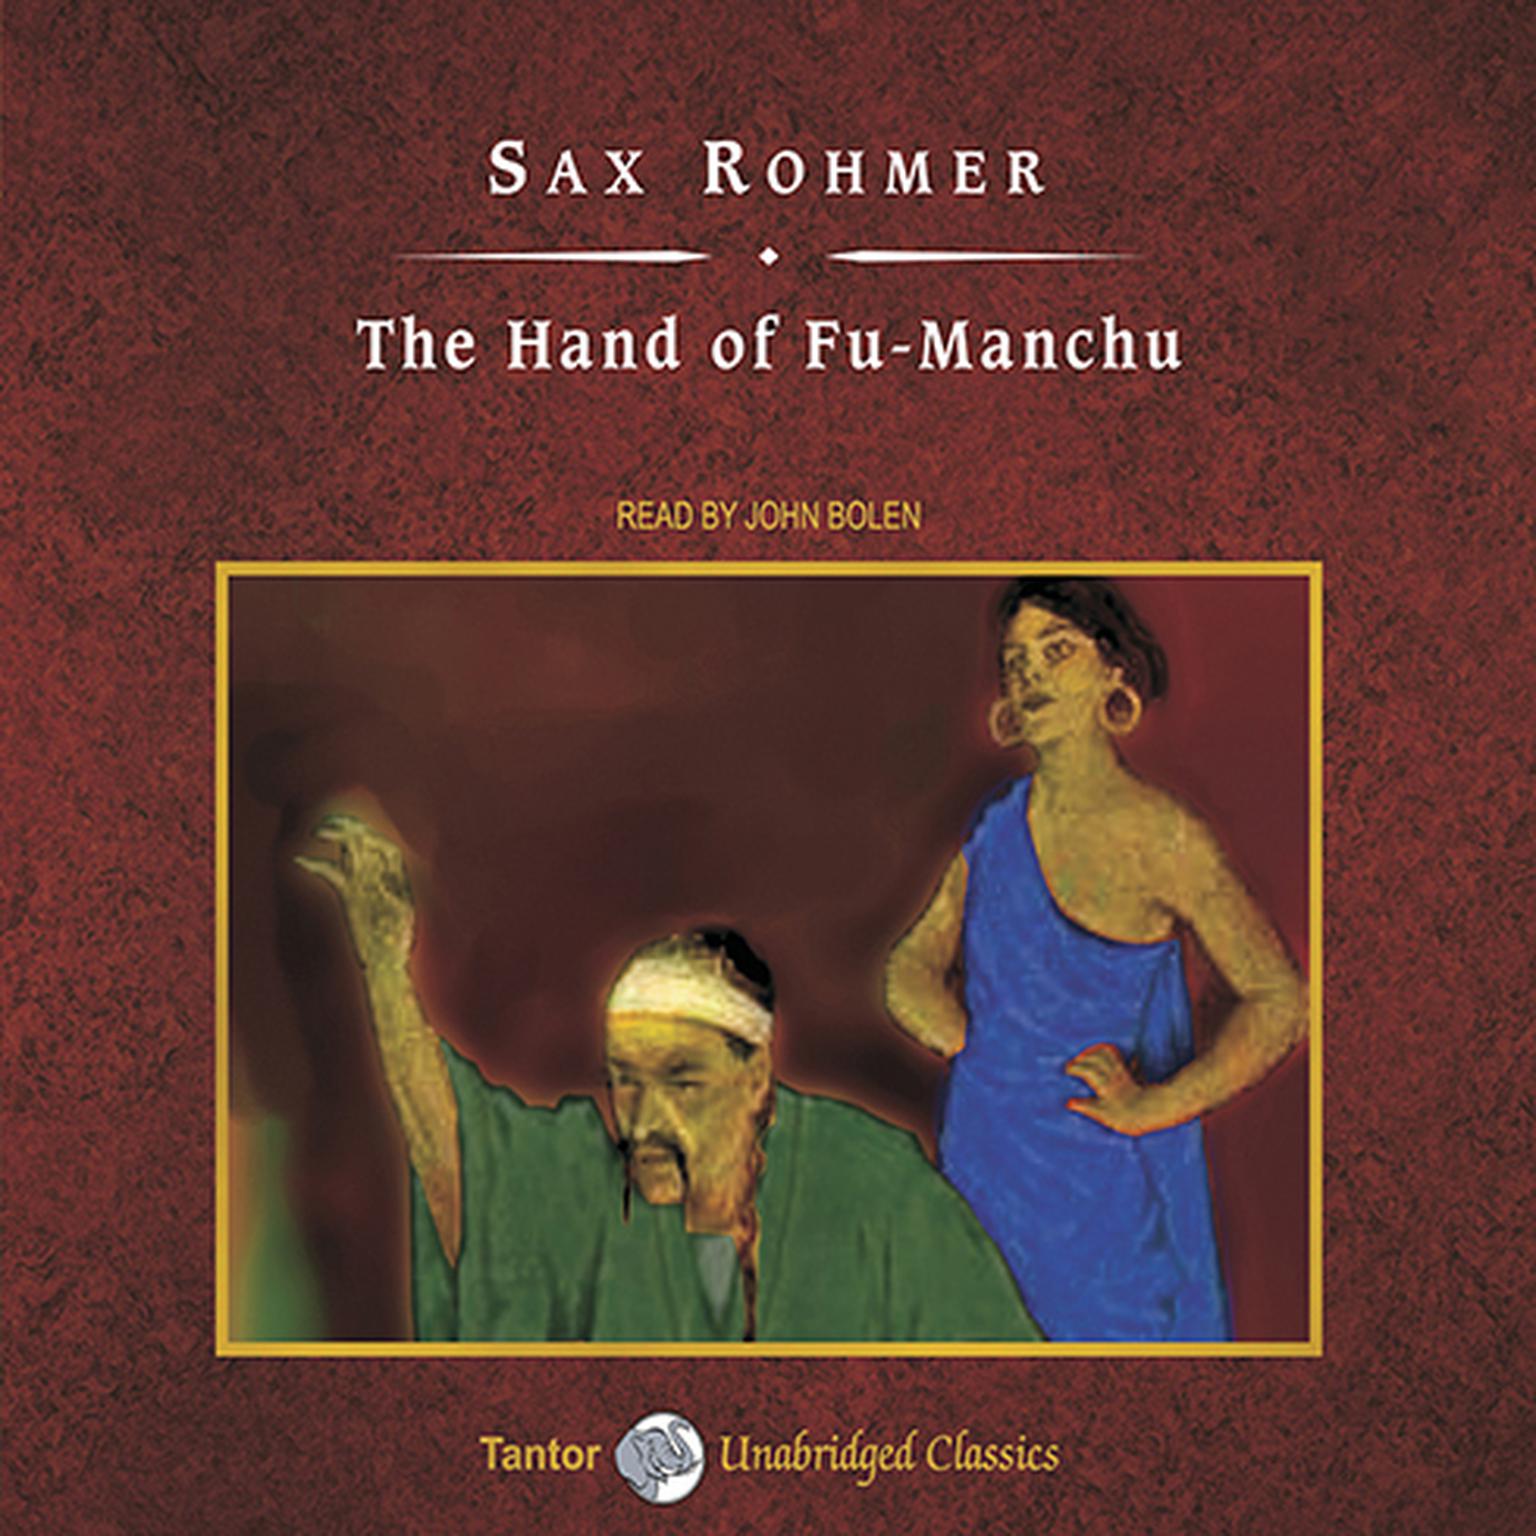 The Hand of Fu-Manchu, with eBook Audiobook, by Sax Rohmer